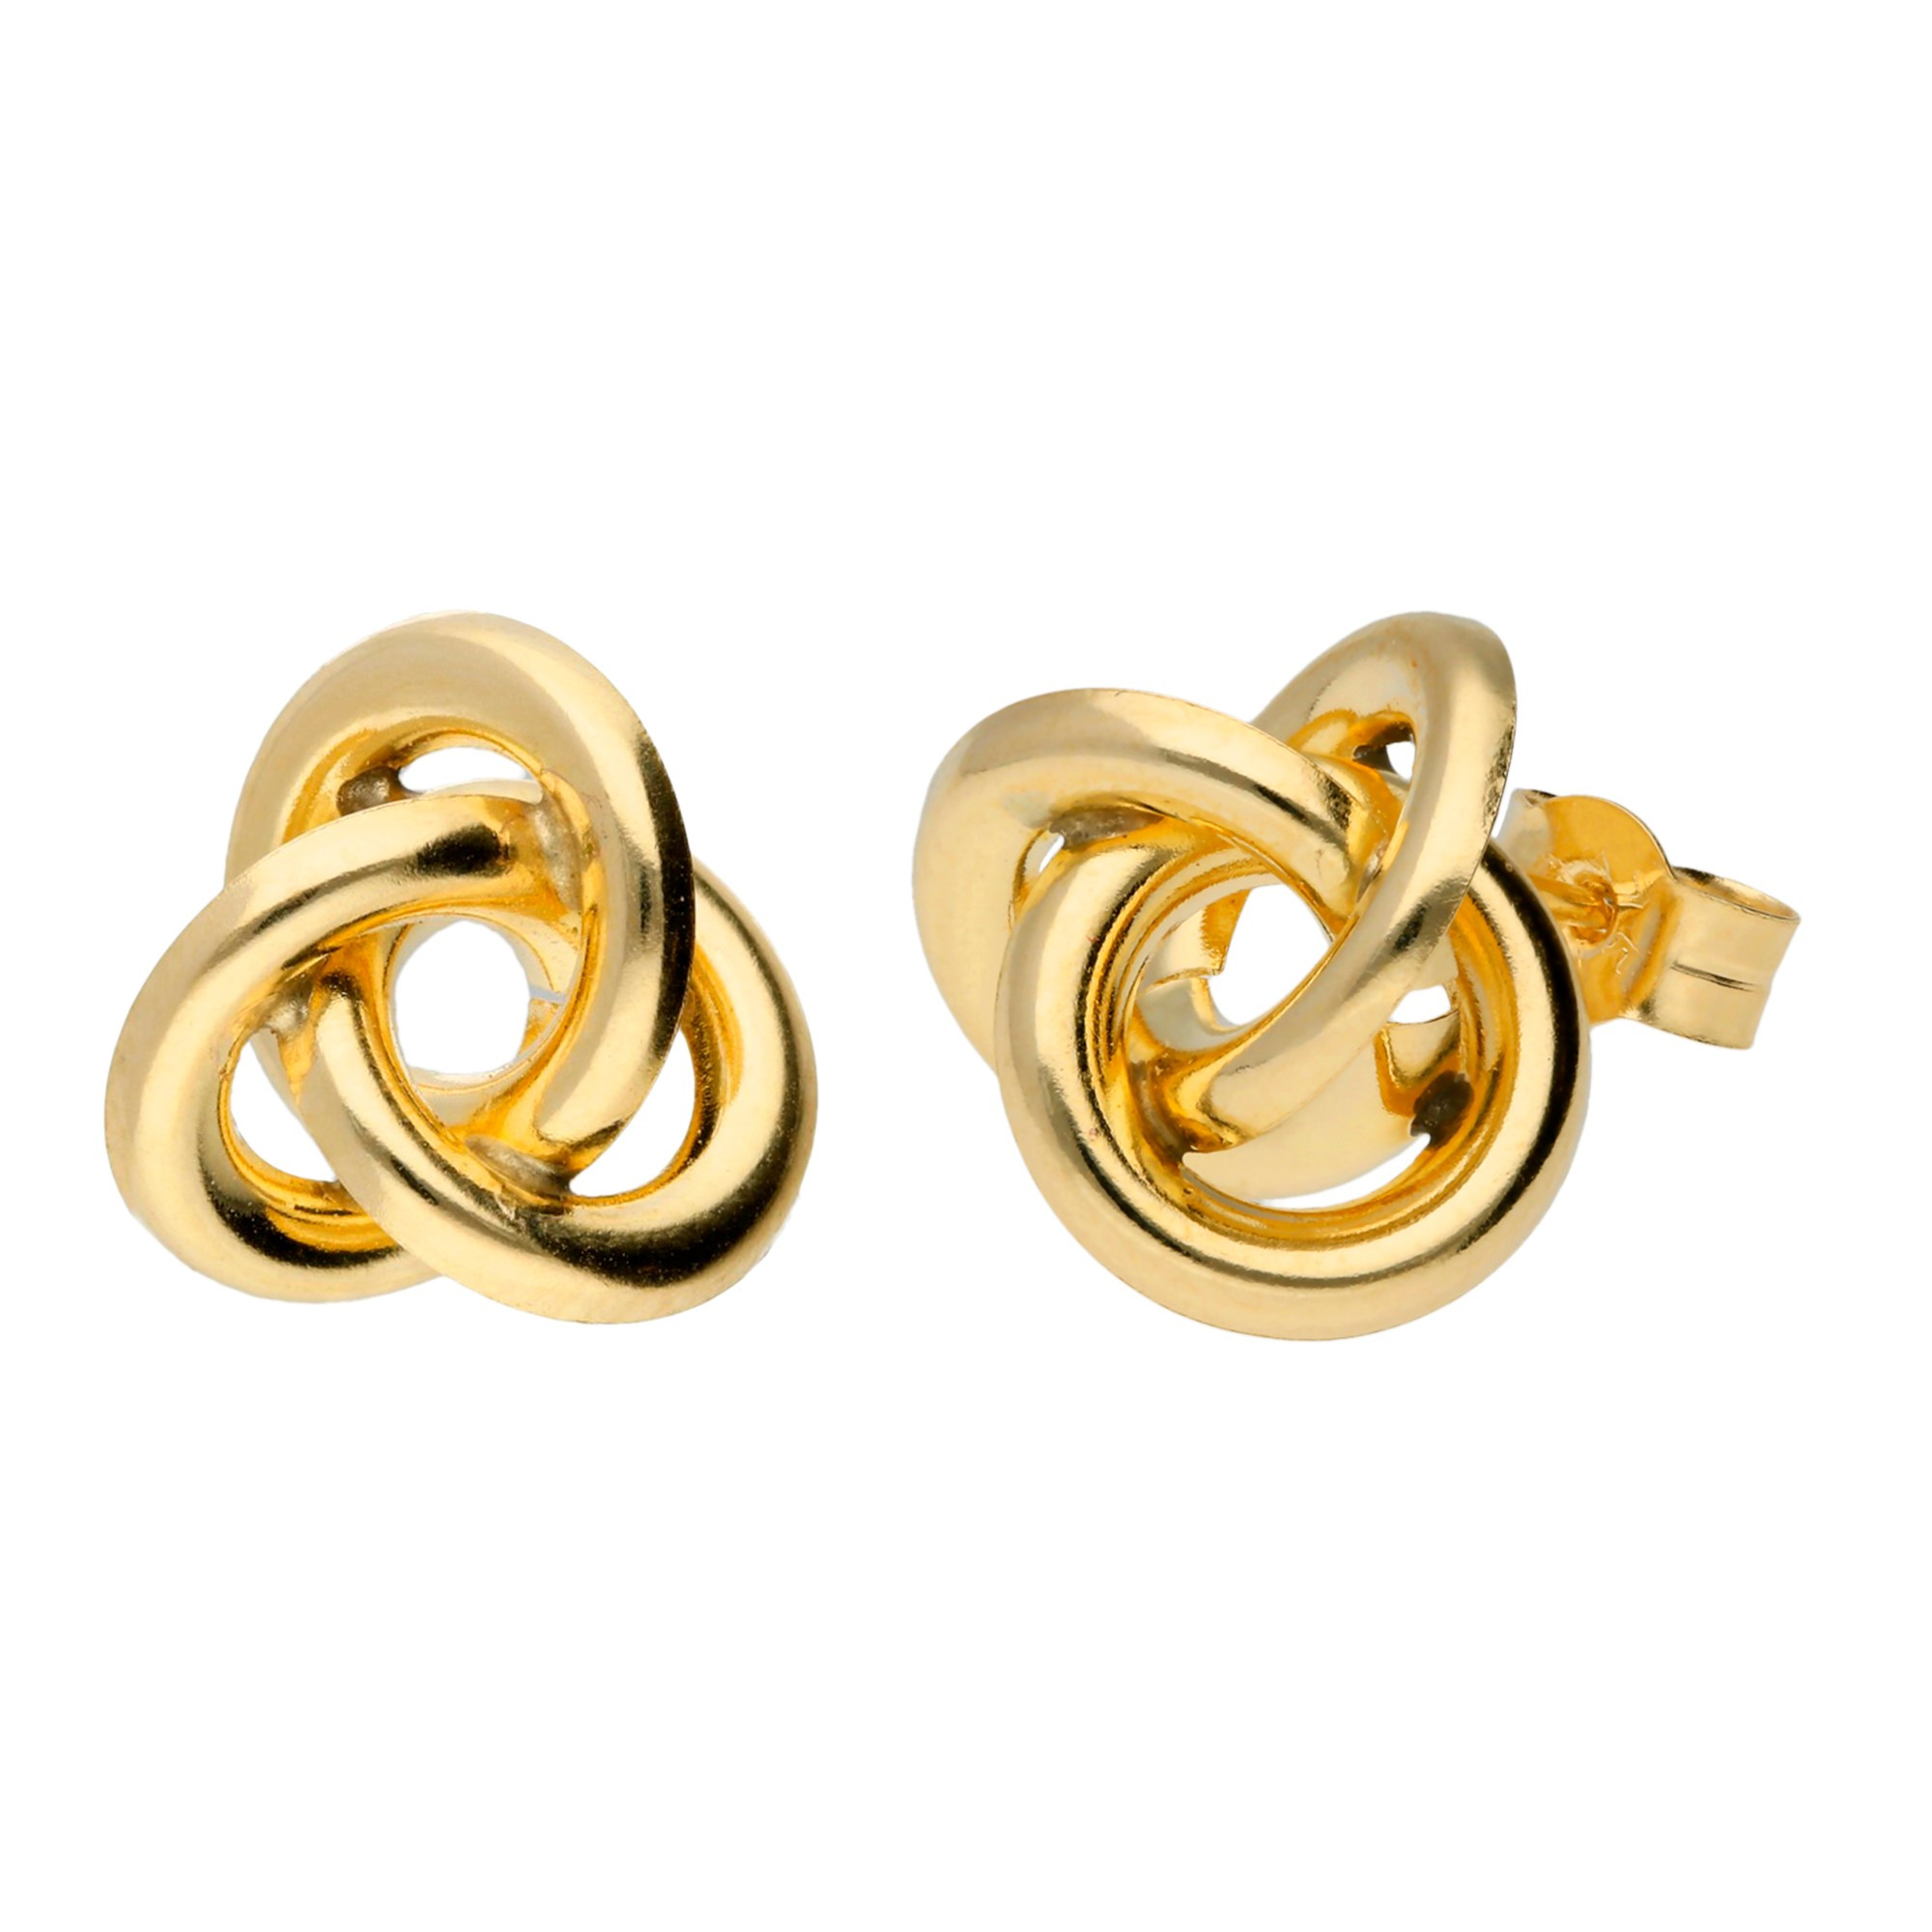 9ct Yellow Gold Large Knot Stud Earrings | Buy Online | Free Insured UK ...